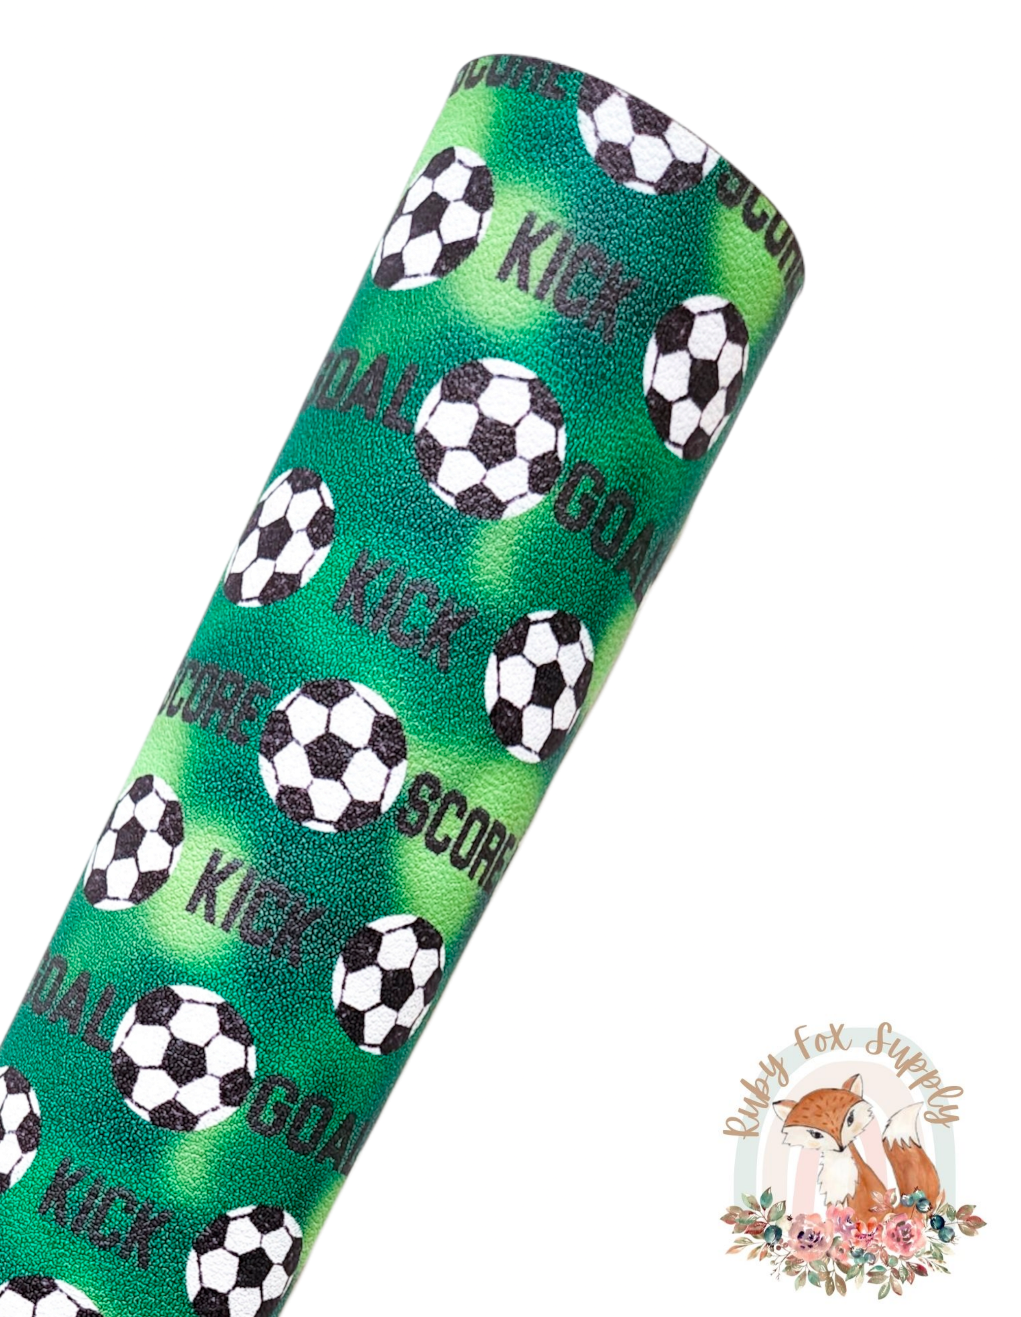 Green Soccer 9x12 faux leather sheet